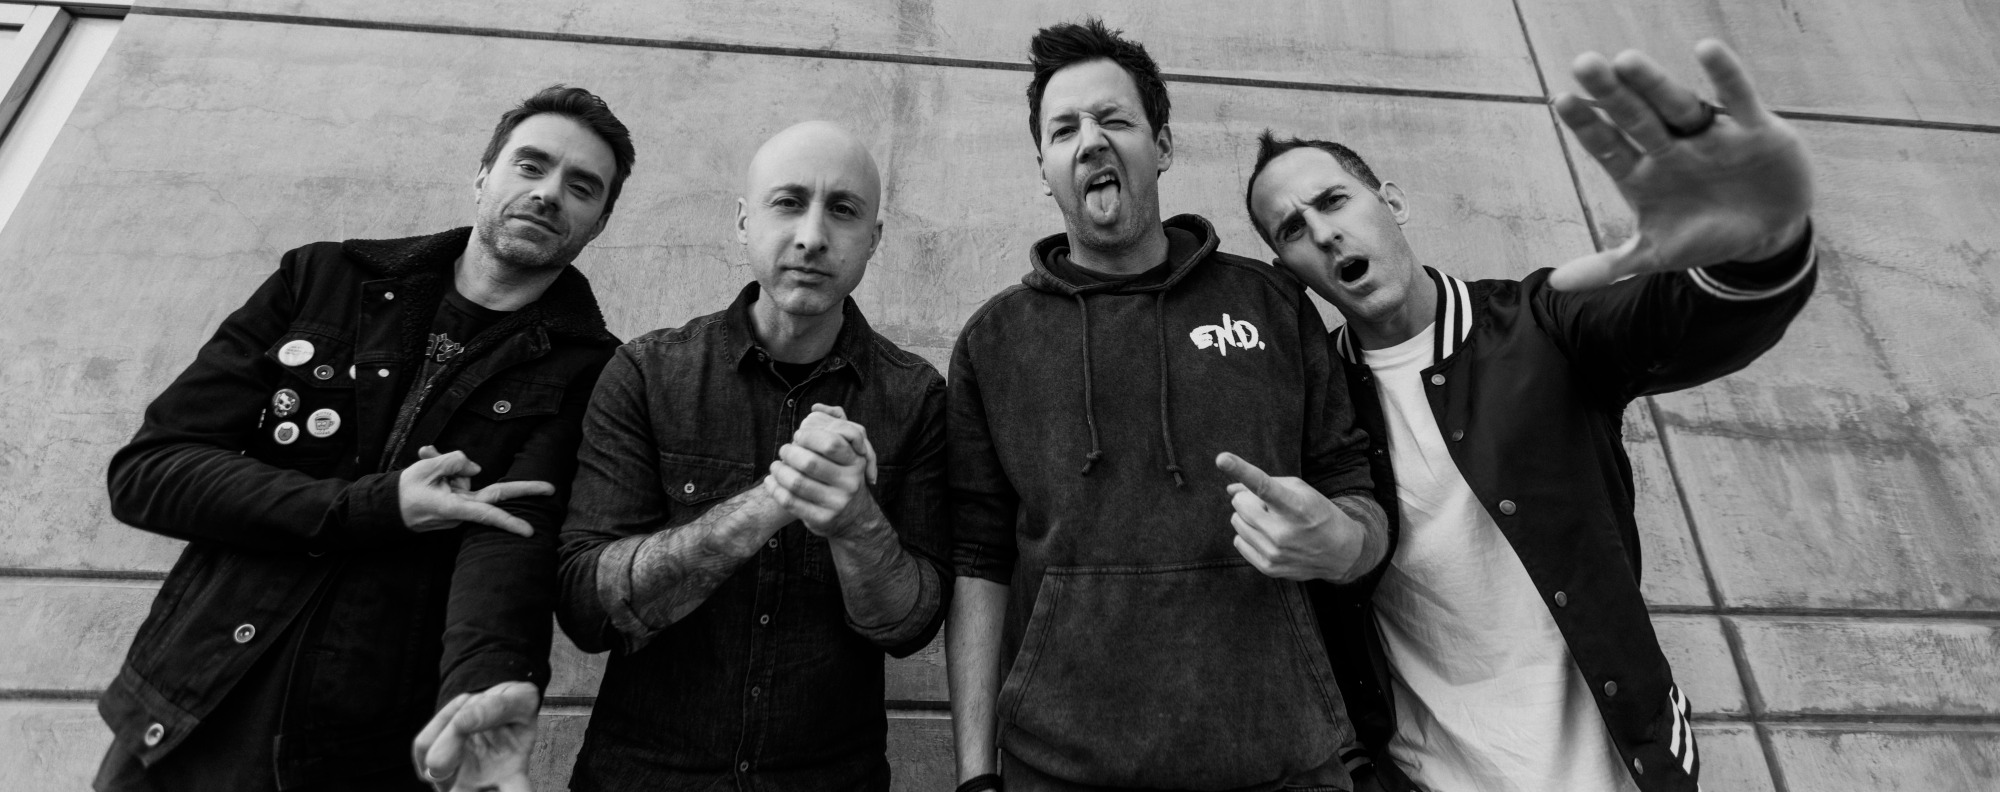 Simple plan: 20 years later and still going strong